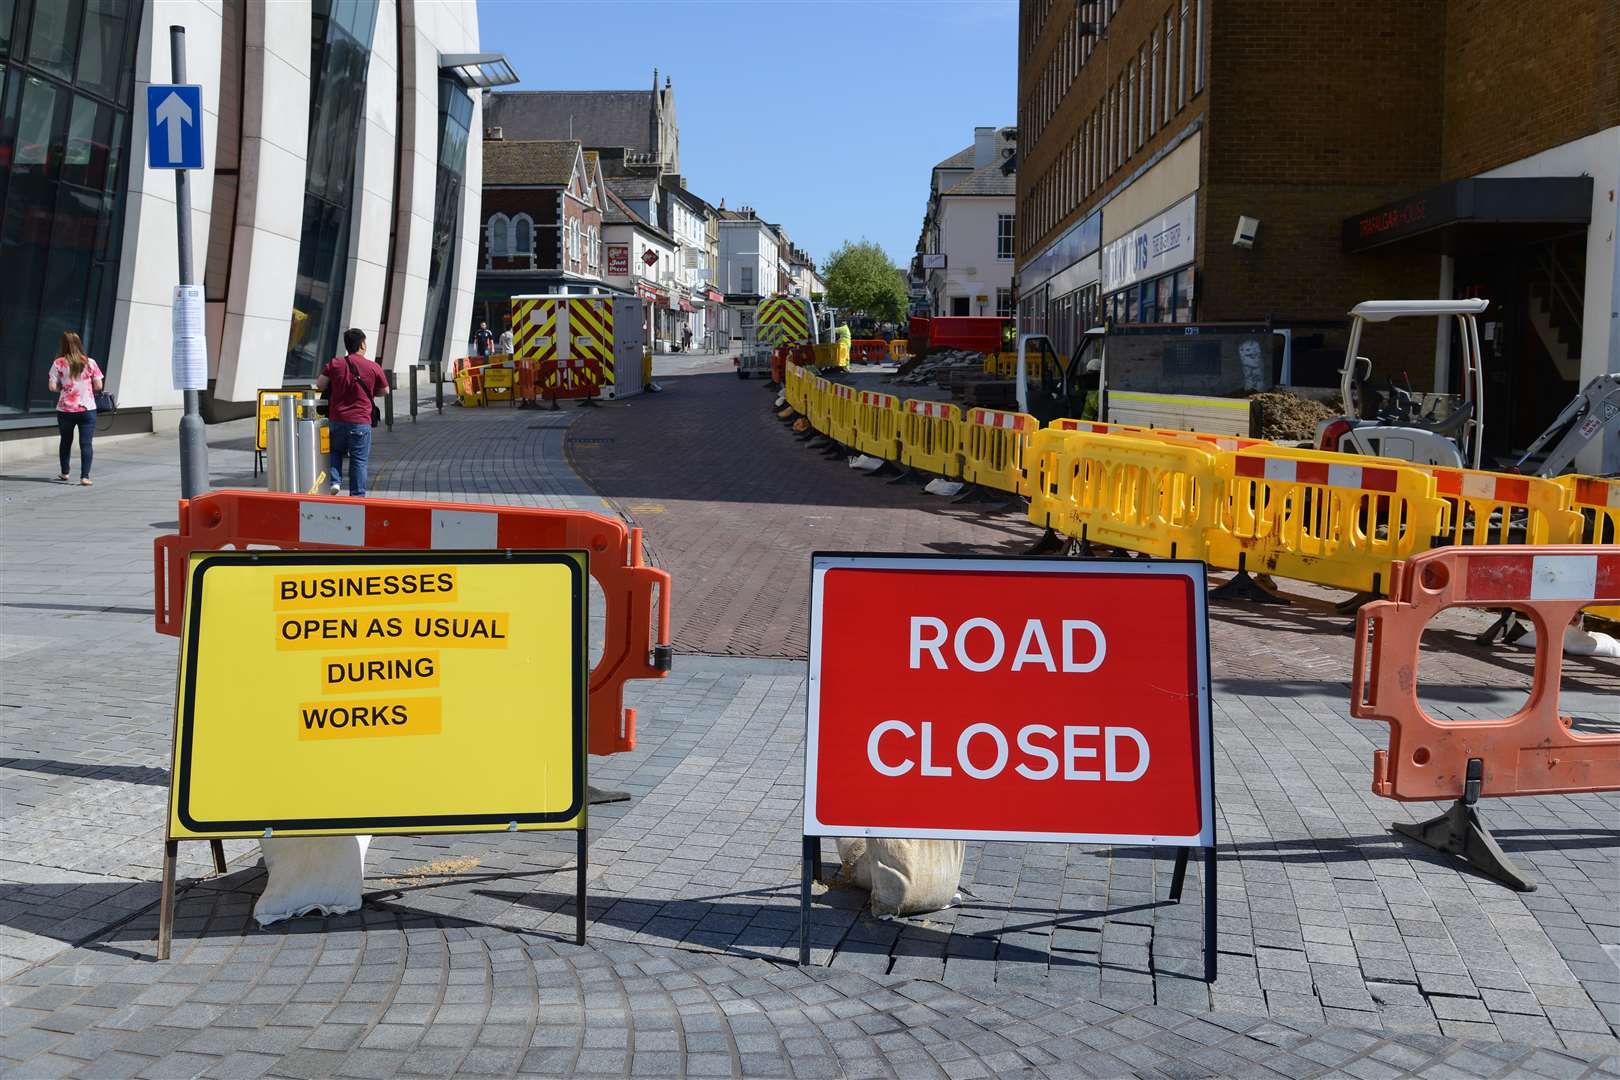 The road will be closed to traffic for around five months